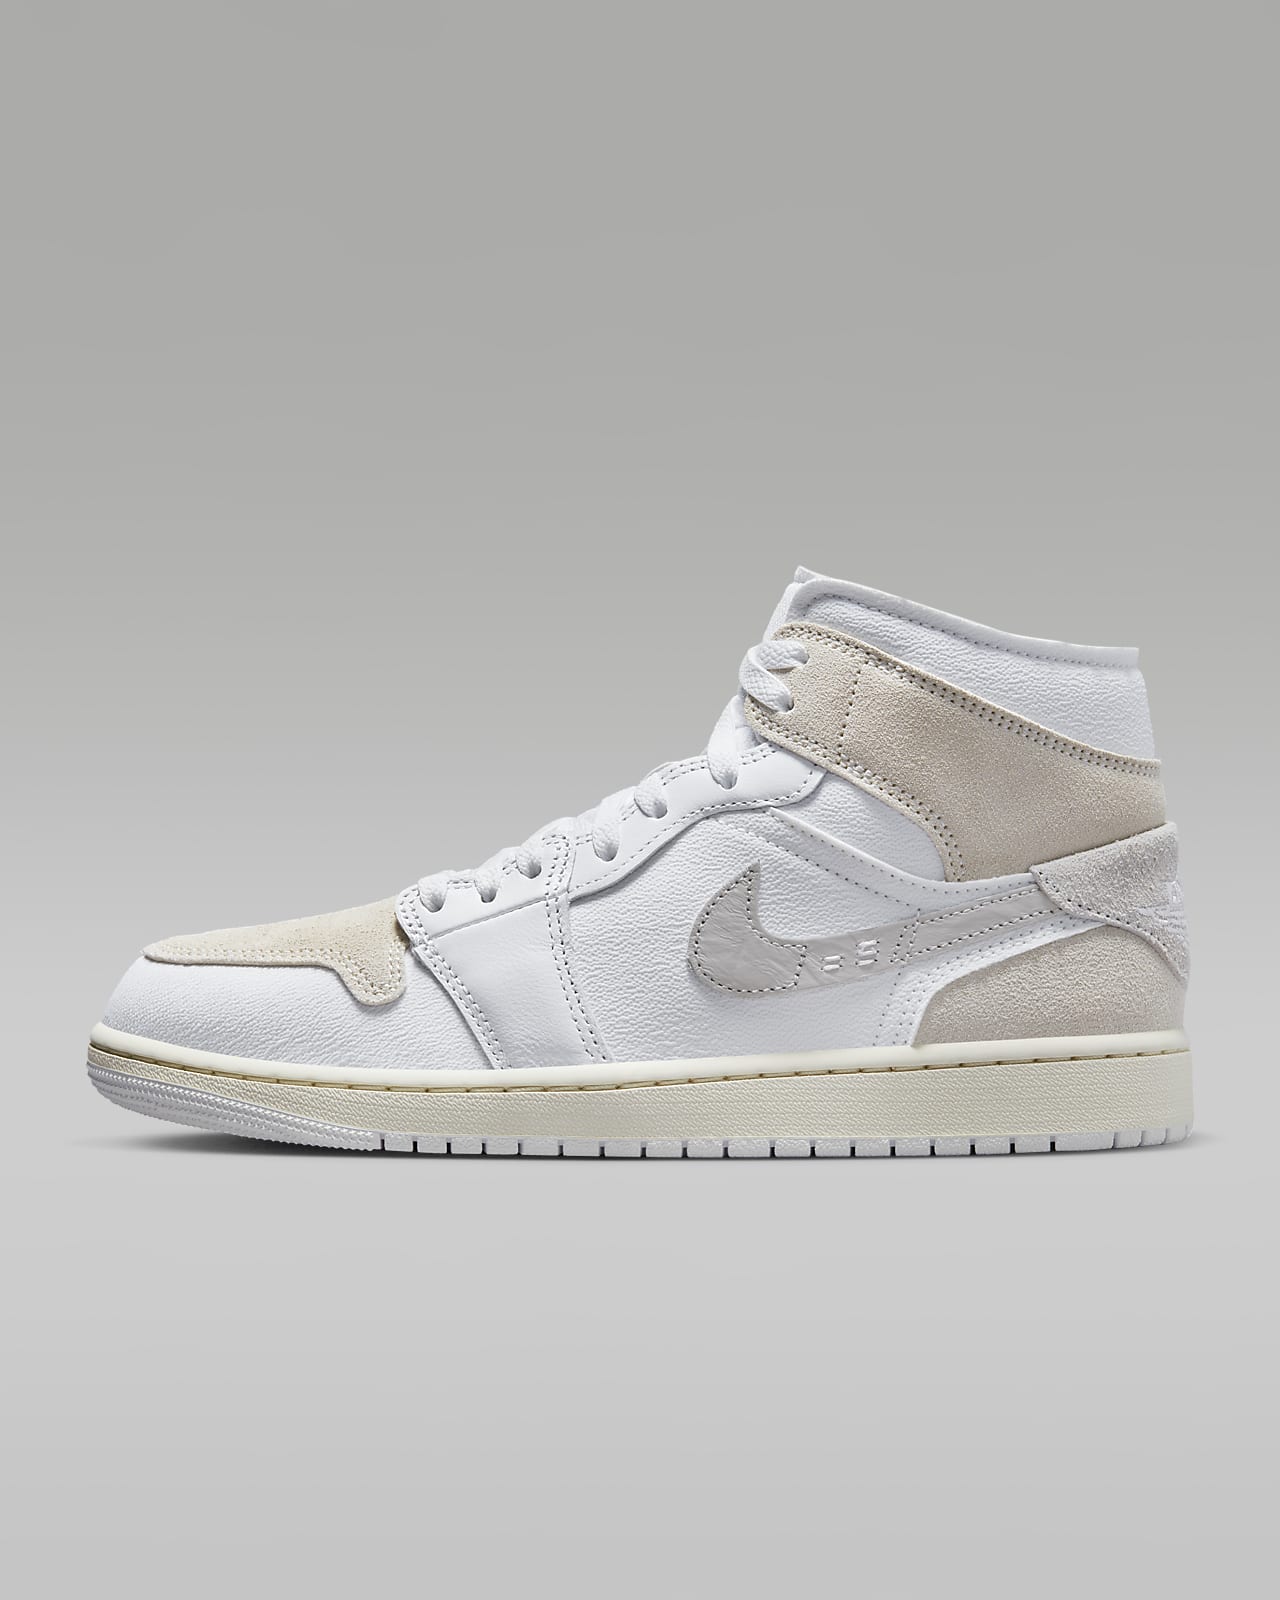 Breaking News: The Air Jordan 1 Mid SE Craft Mens Shoes - A Game-Changer in Sneaker Fashion!